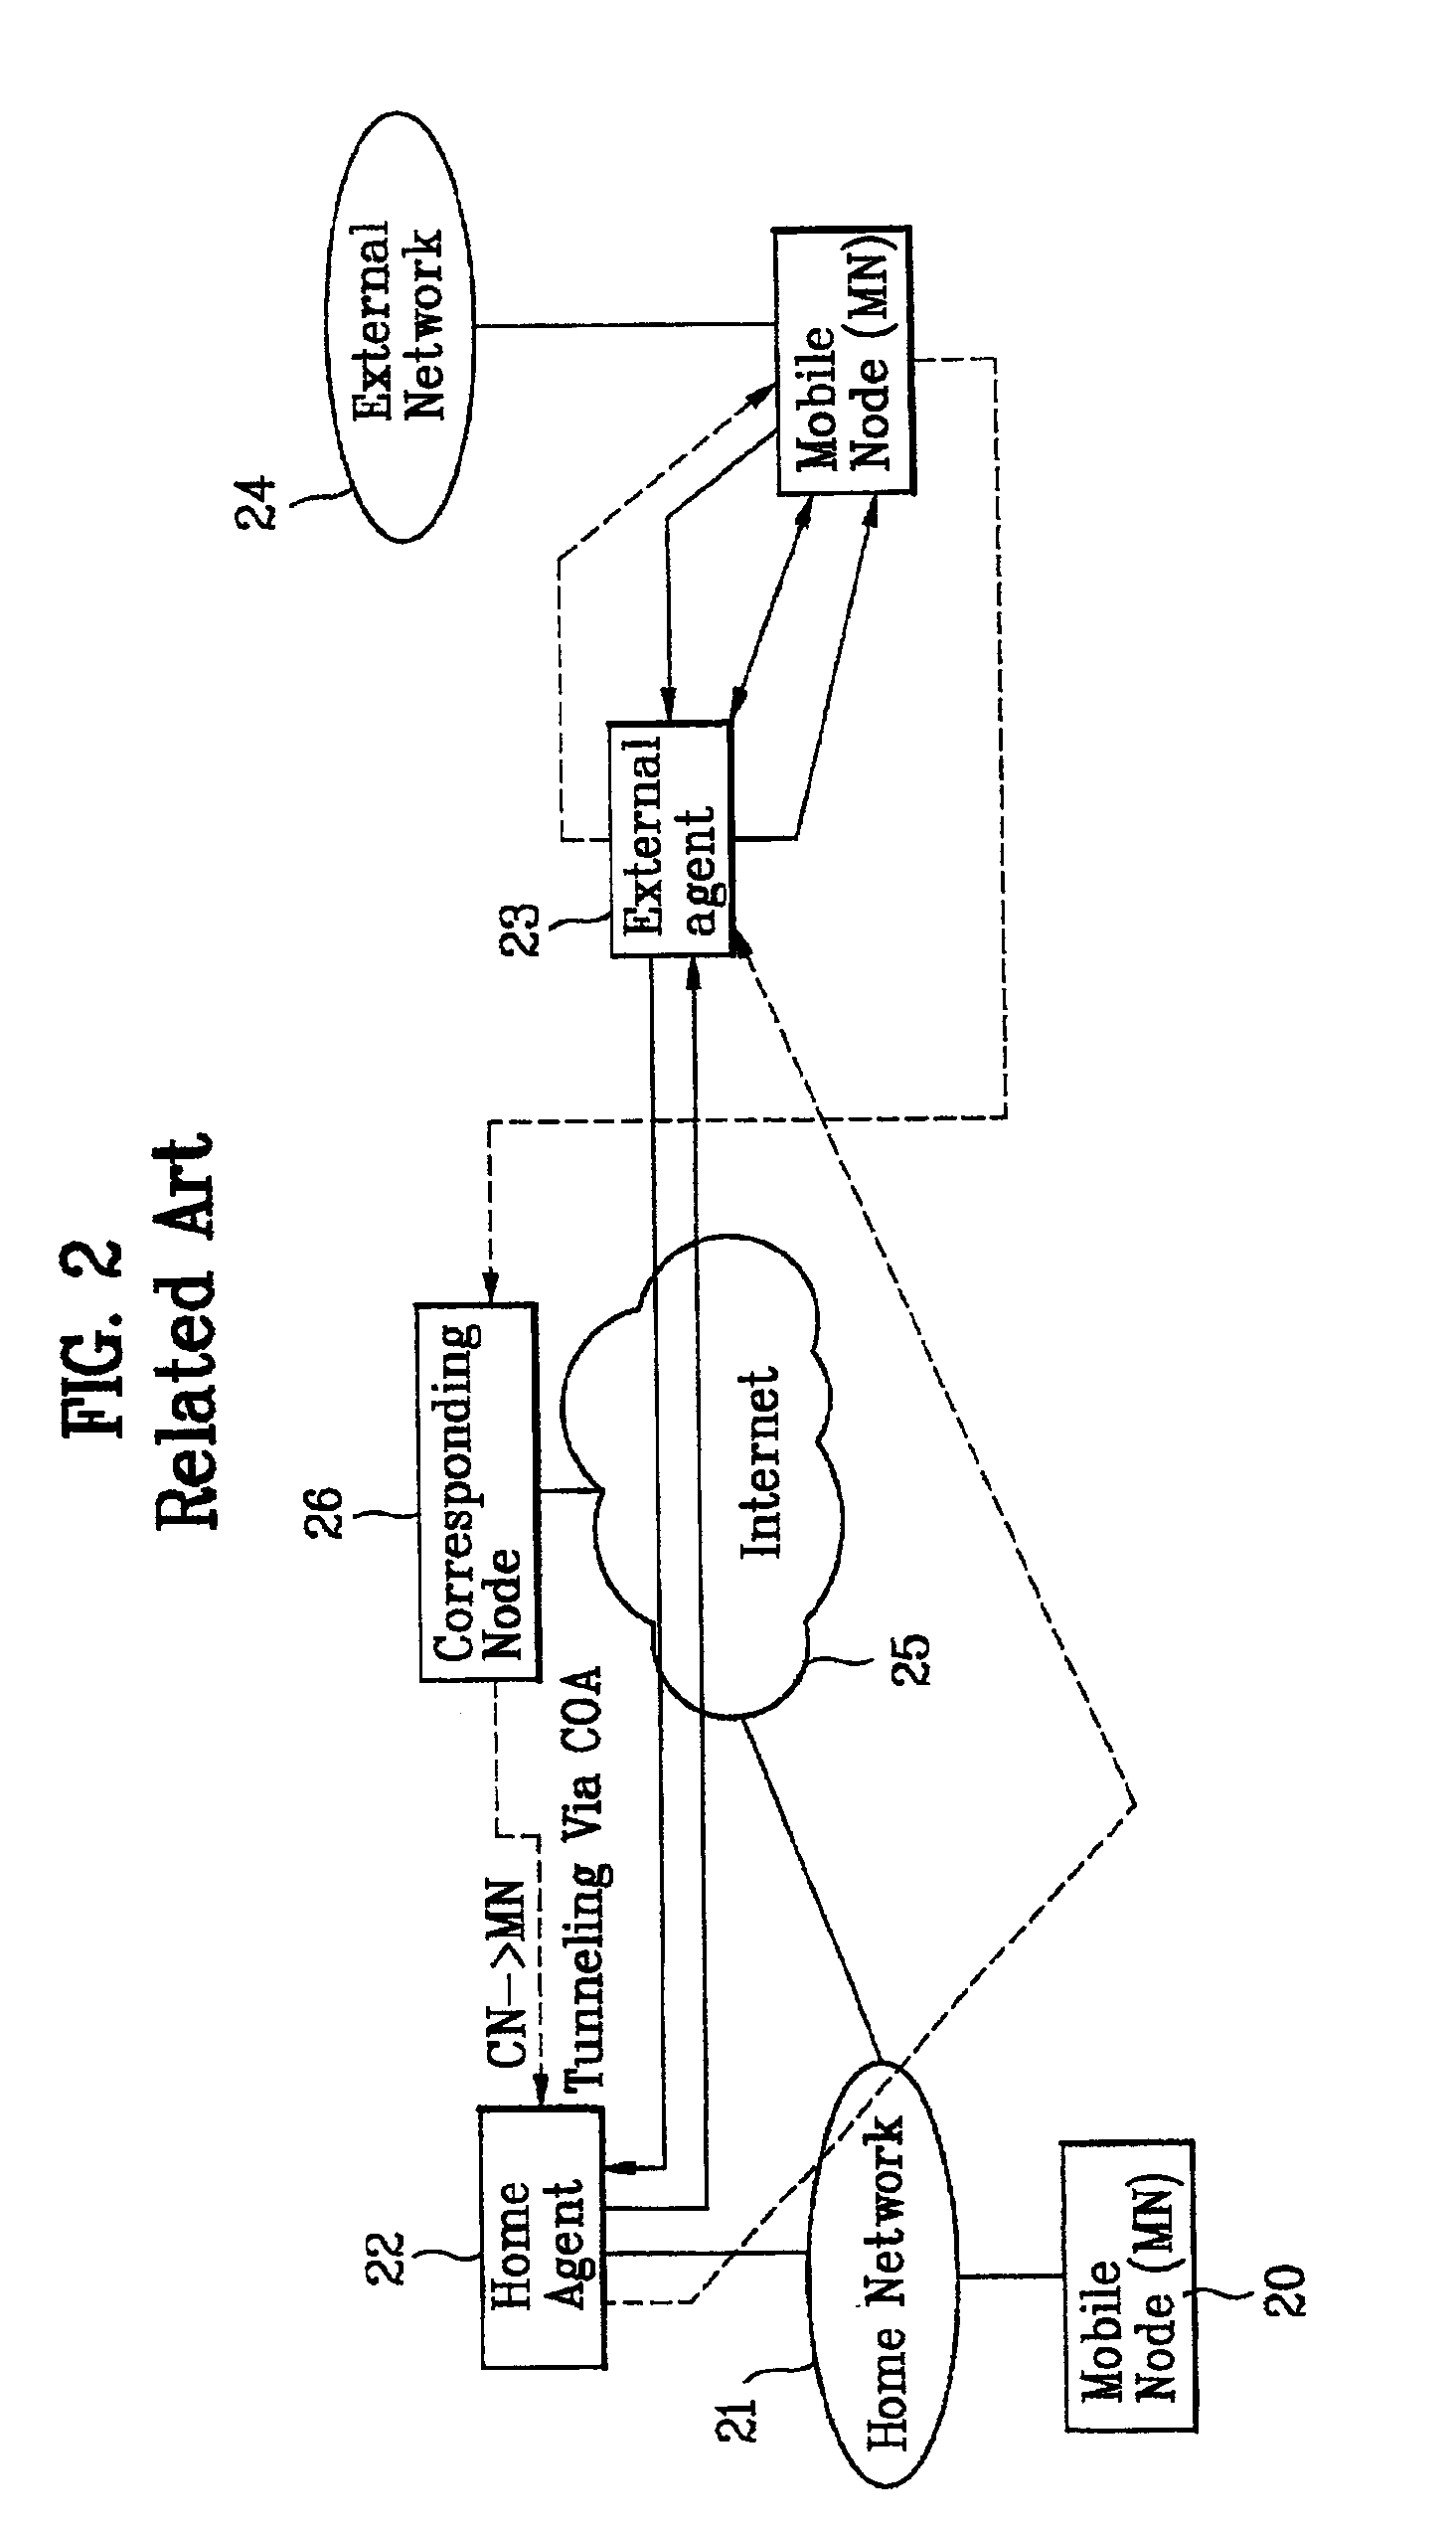 Bluetooth private network and communication method thereof